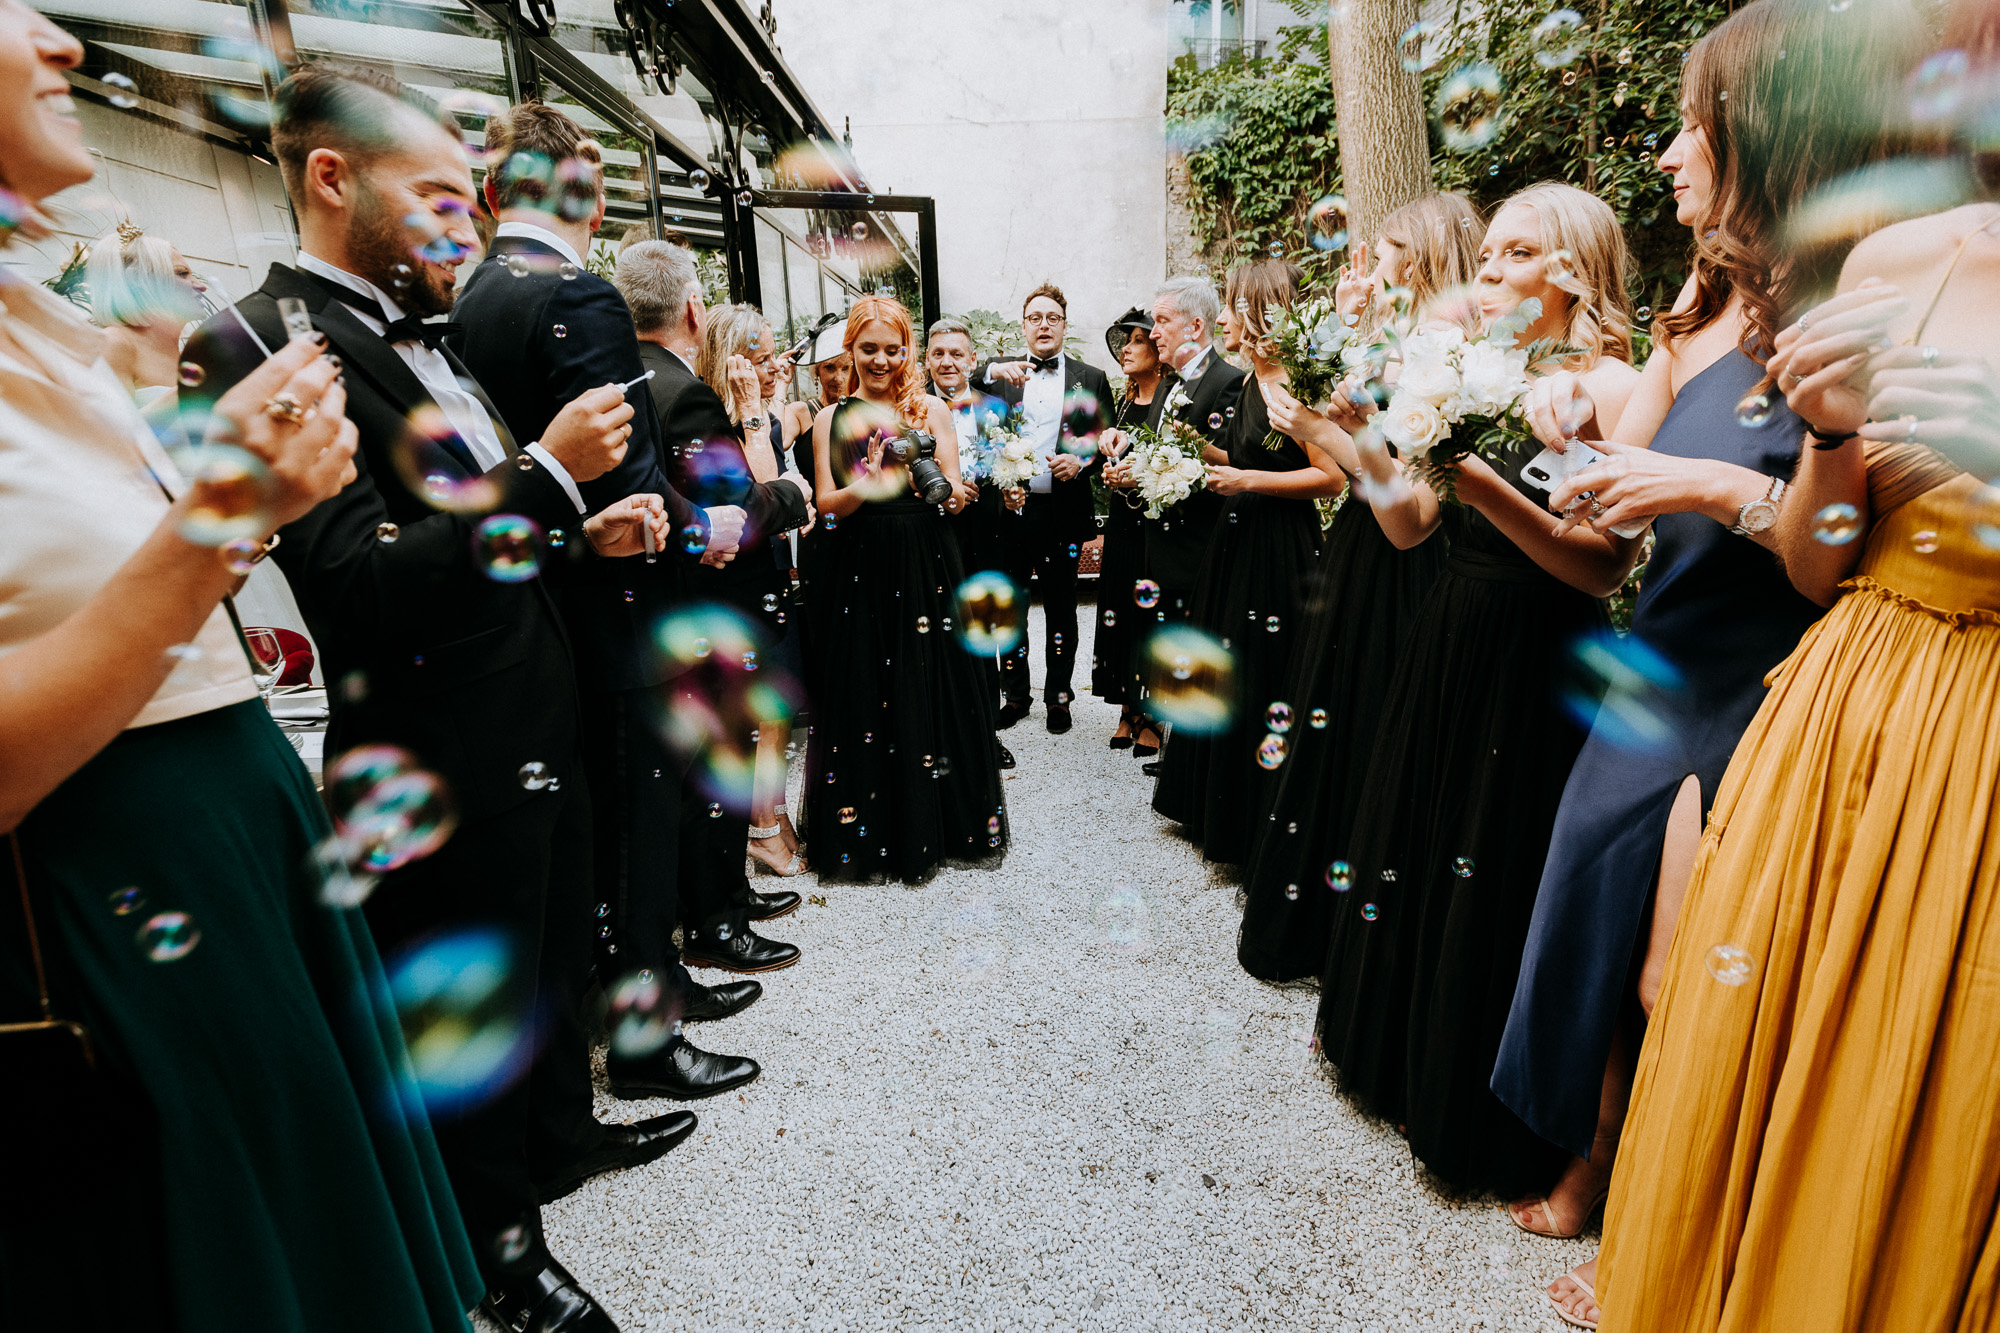 Paris wedding photographer: the guests are waiting for the newlyweds to meet them in the patio and are blowing lots of bubbles in the meantime